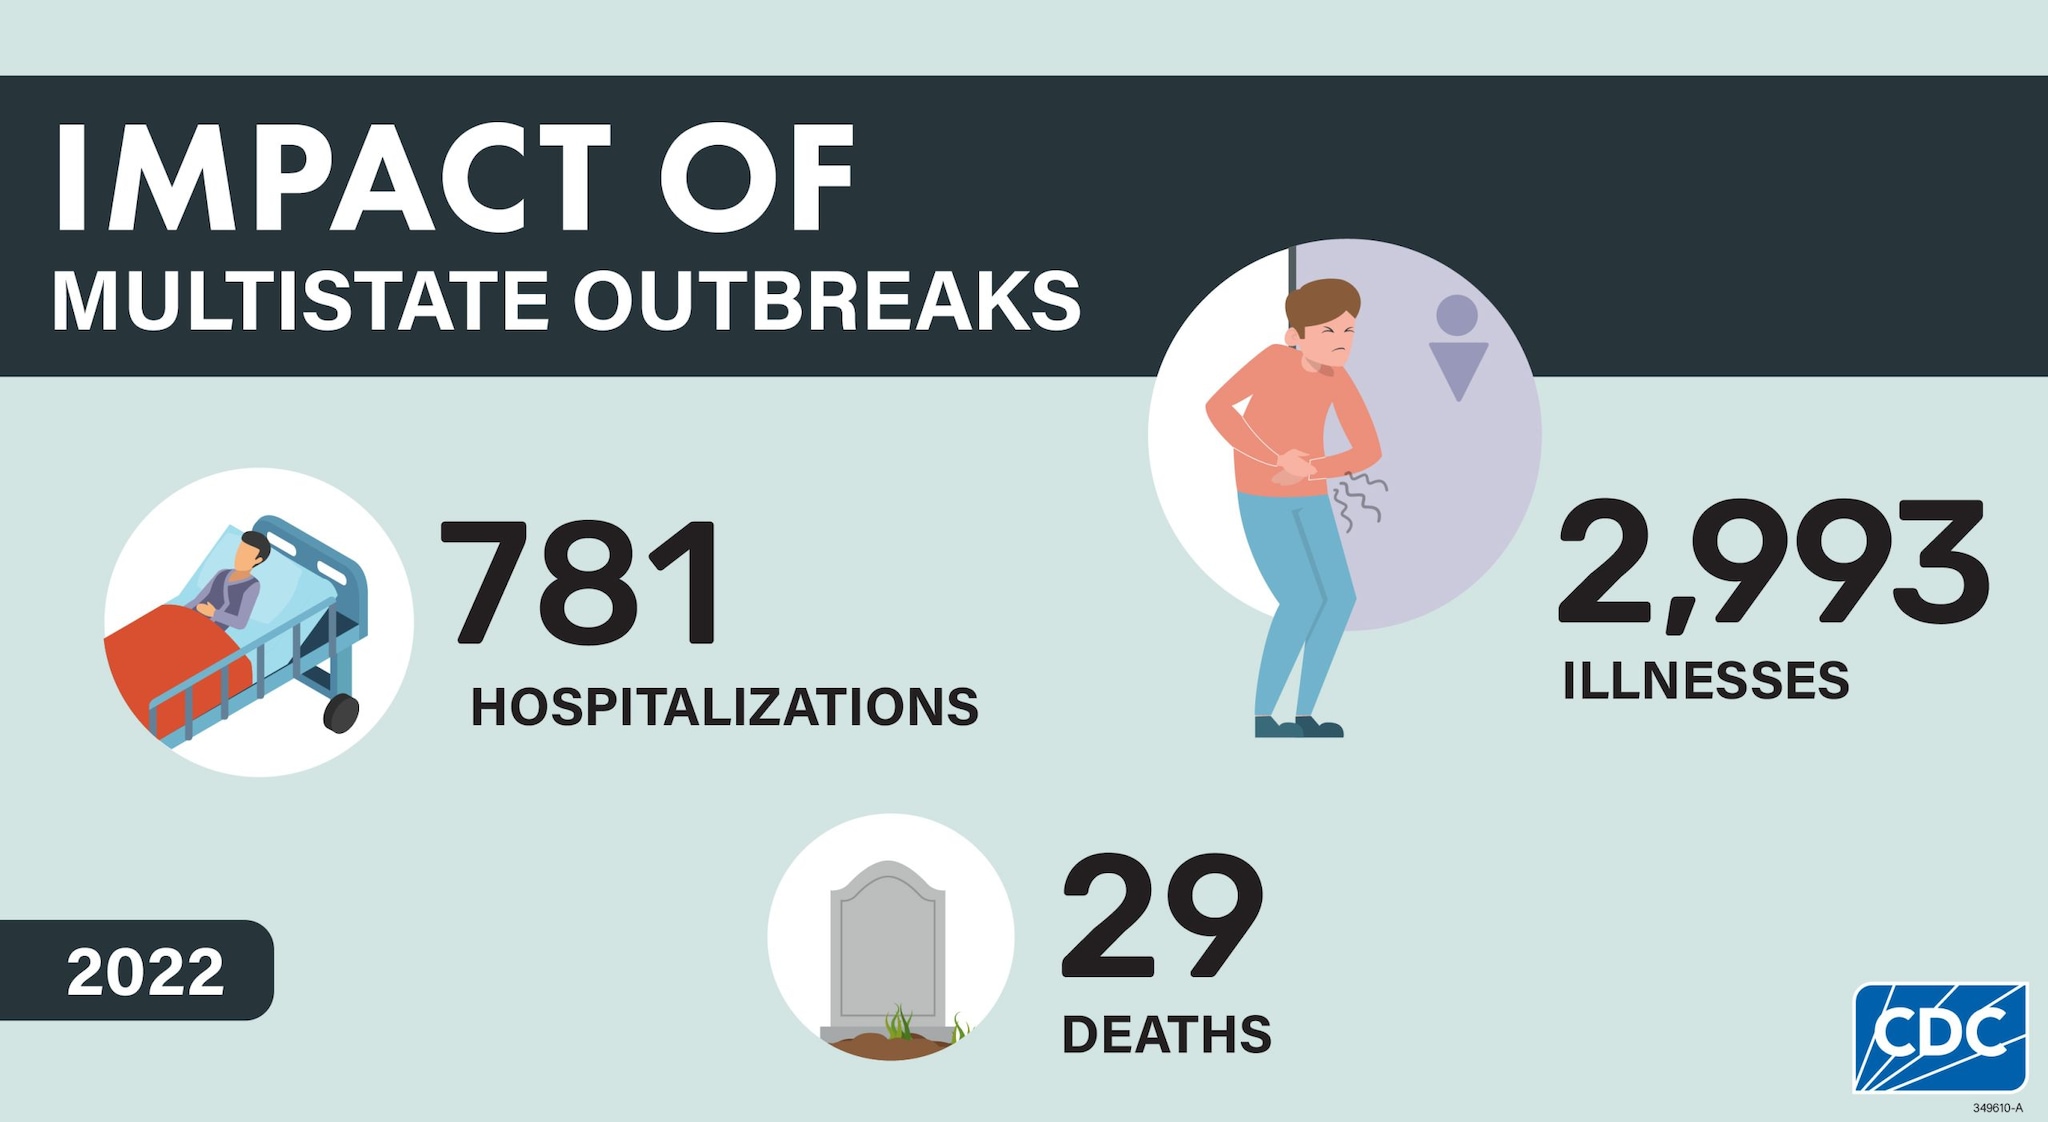 Impact of multistate outbreaks: 2993 illnesses, 781 hospitalizations, and 29 deaths